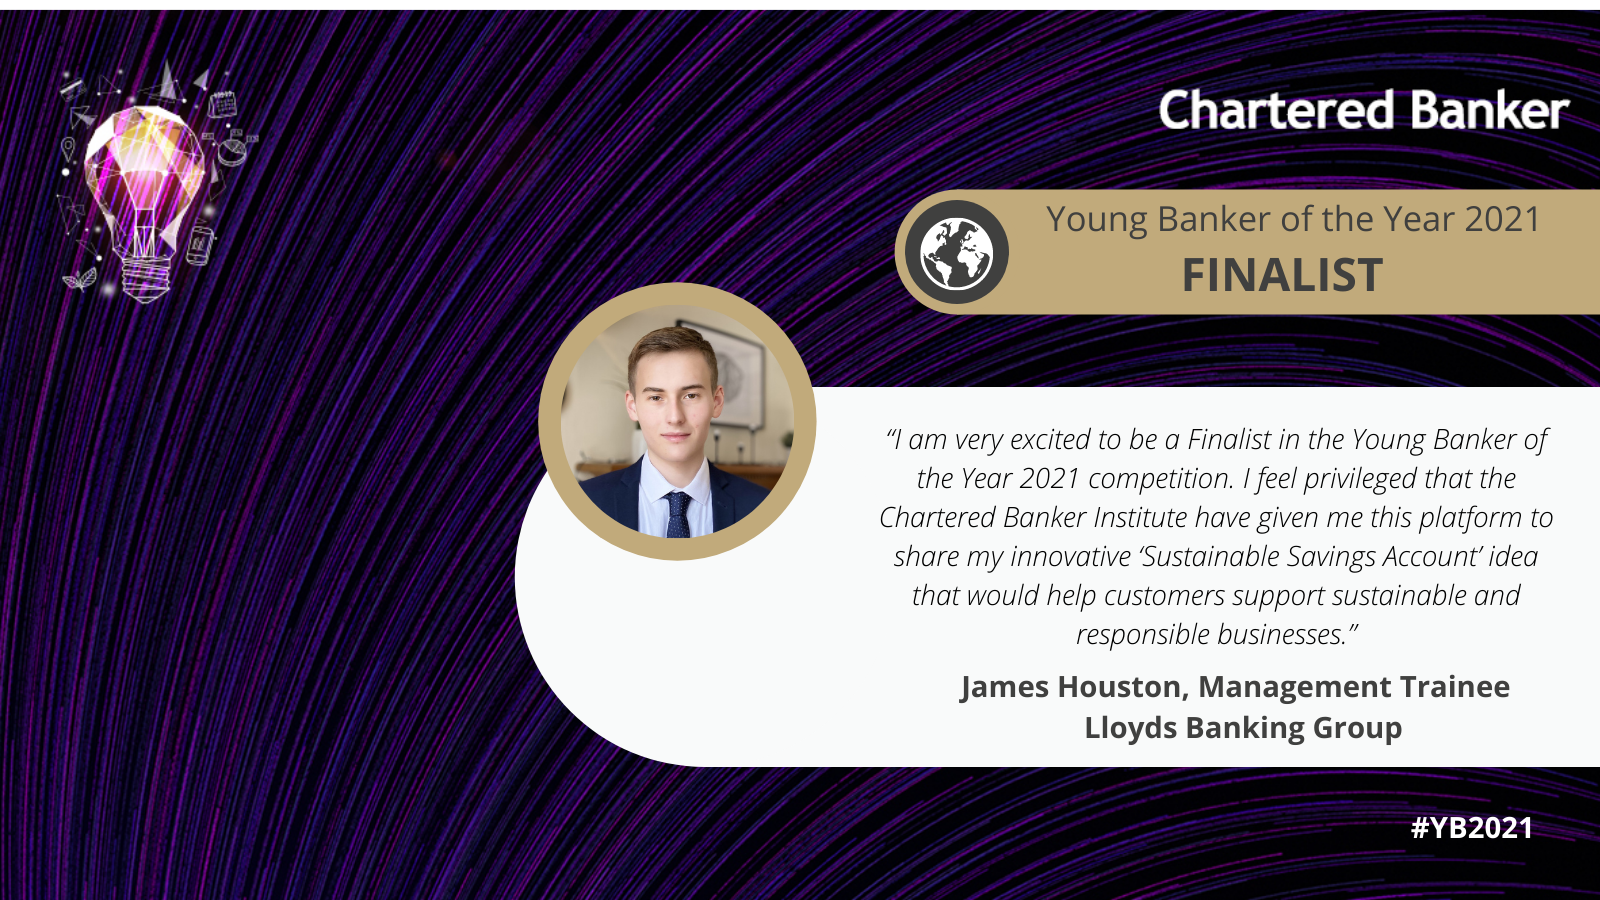 Young Banker of the Year 2021 - James Houston's Proposal